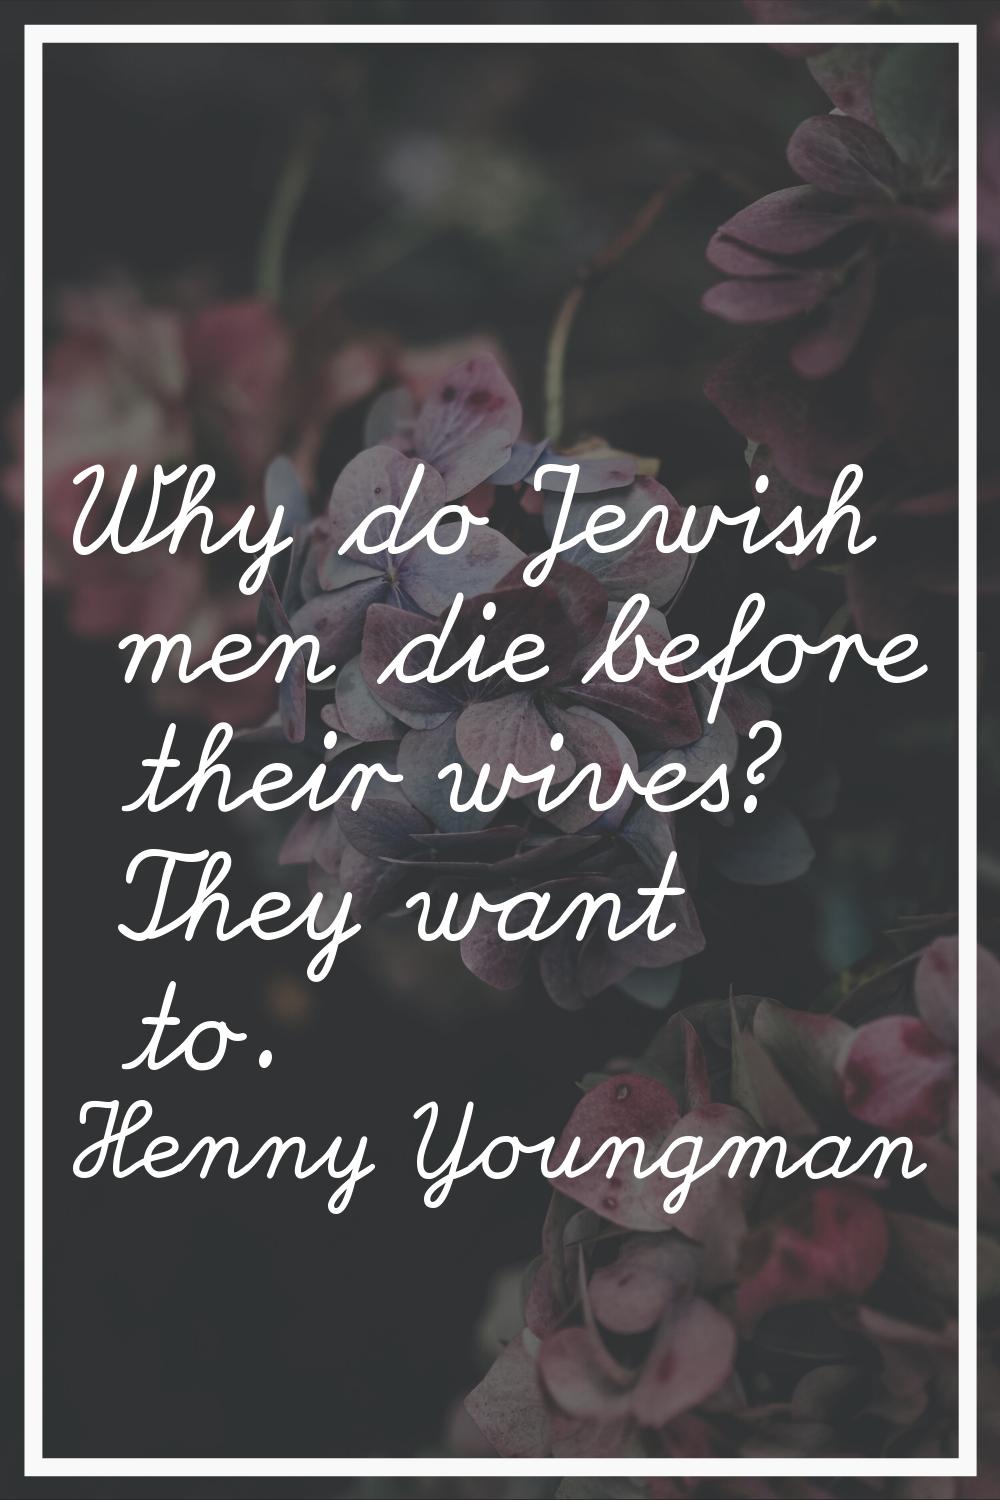 Why do Jewish men die before their wives? They want to.